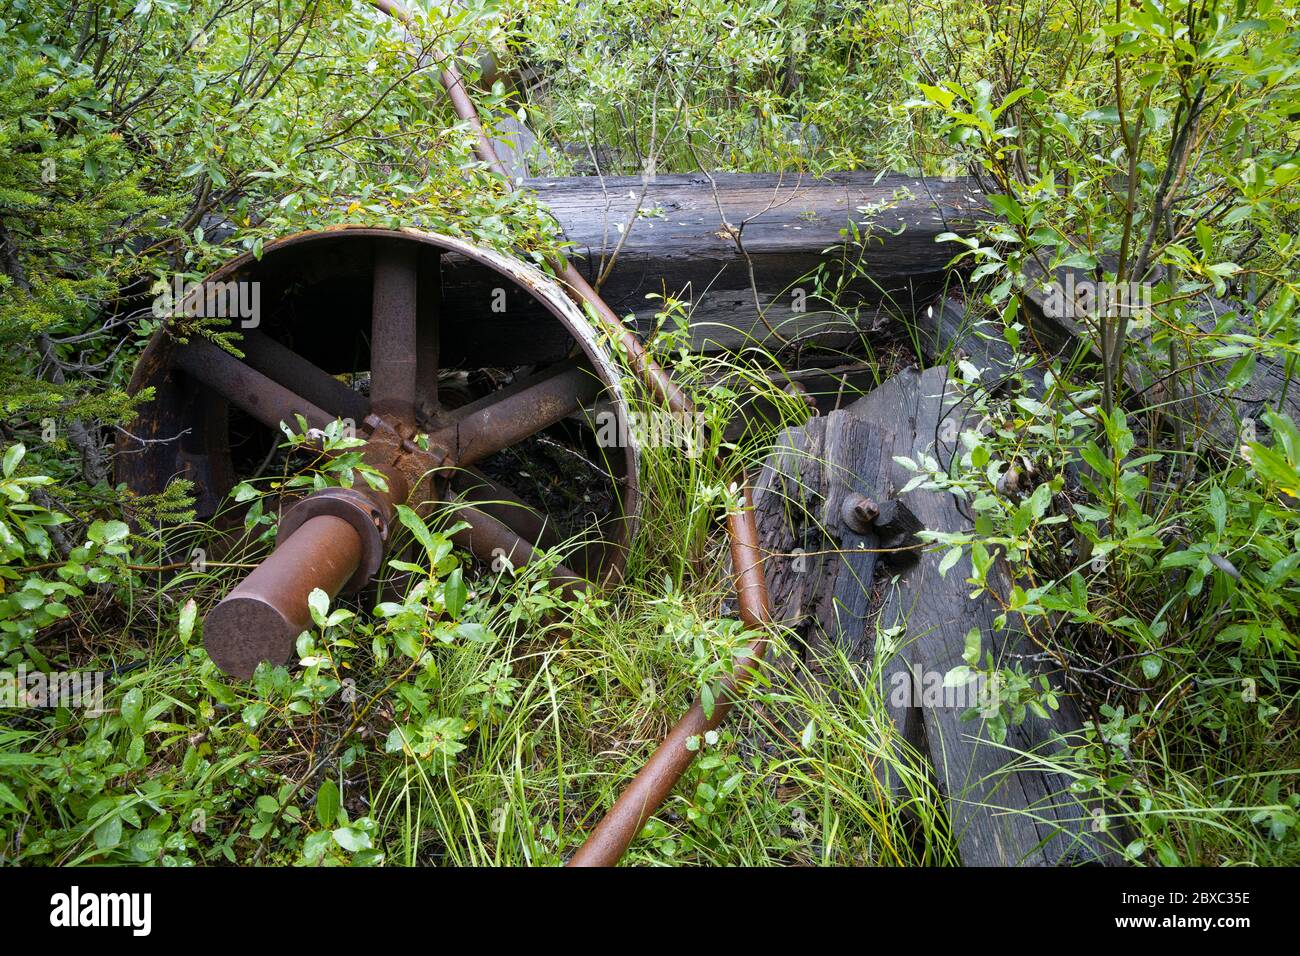 Rusty pieces of mining machinery are being swallowed by the forest in the Elkhorn mining district of Montana near the ghost town of Coolidge. Stock Photo